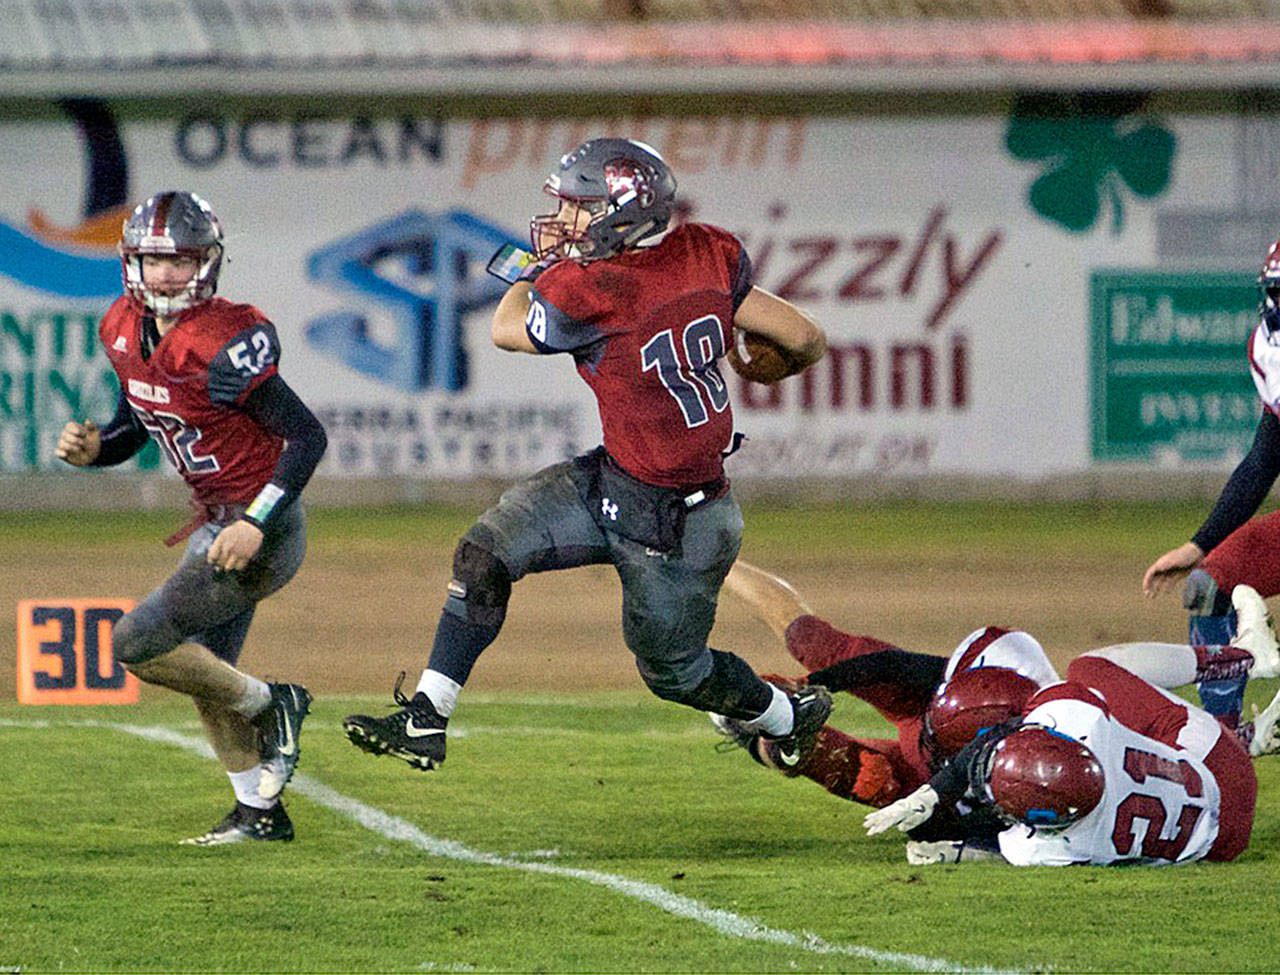 Hoquiam quarterback Payton Quintanilla takes off on a run in a 49-0 state-playoff victory over Stevenson on Saturday. (Photo by Patti Reynvaan)